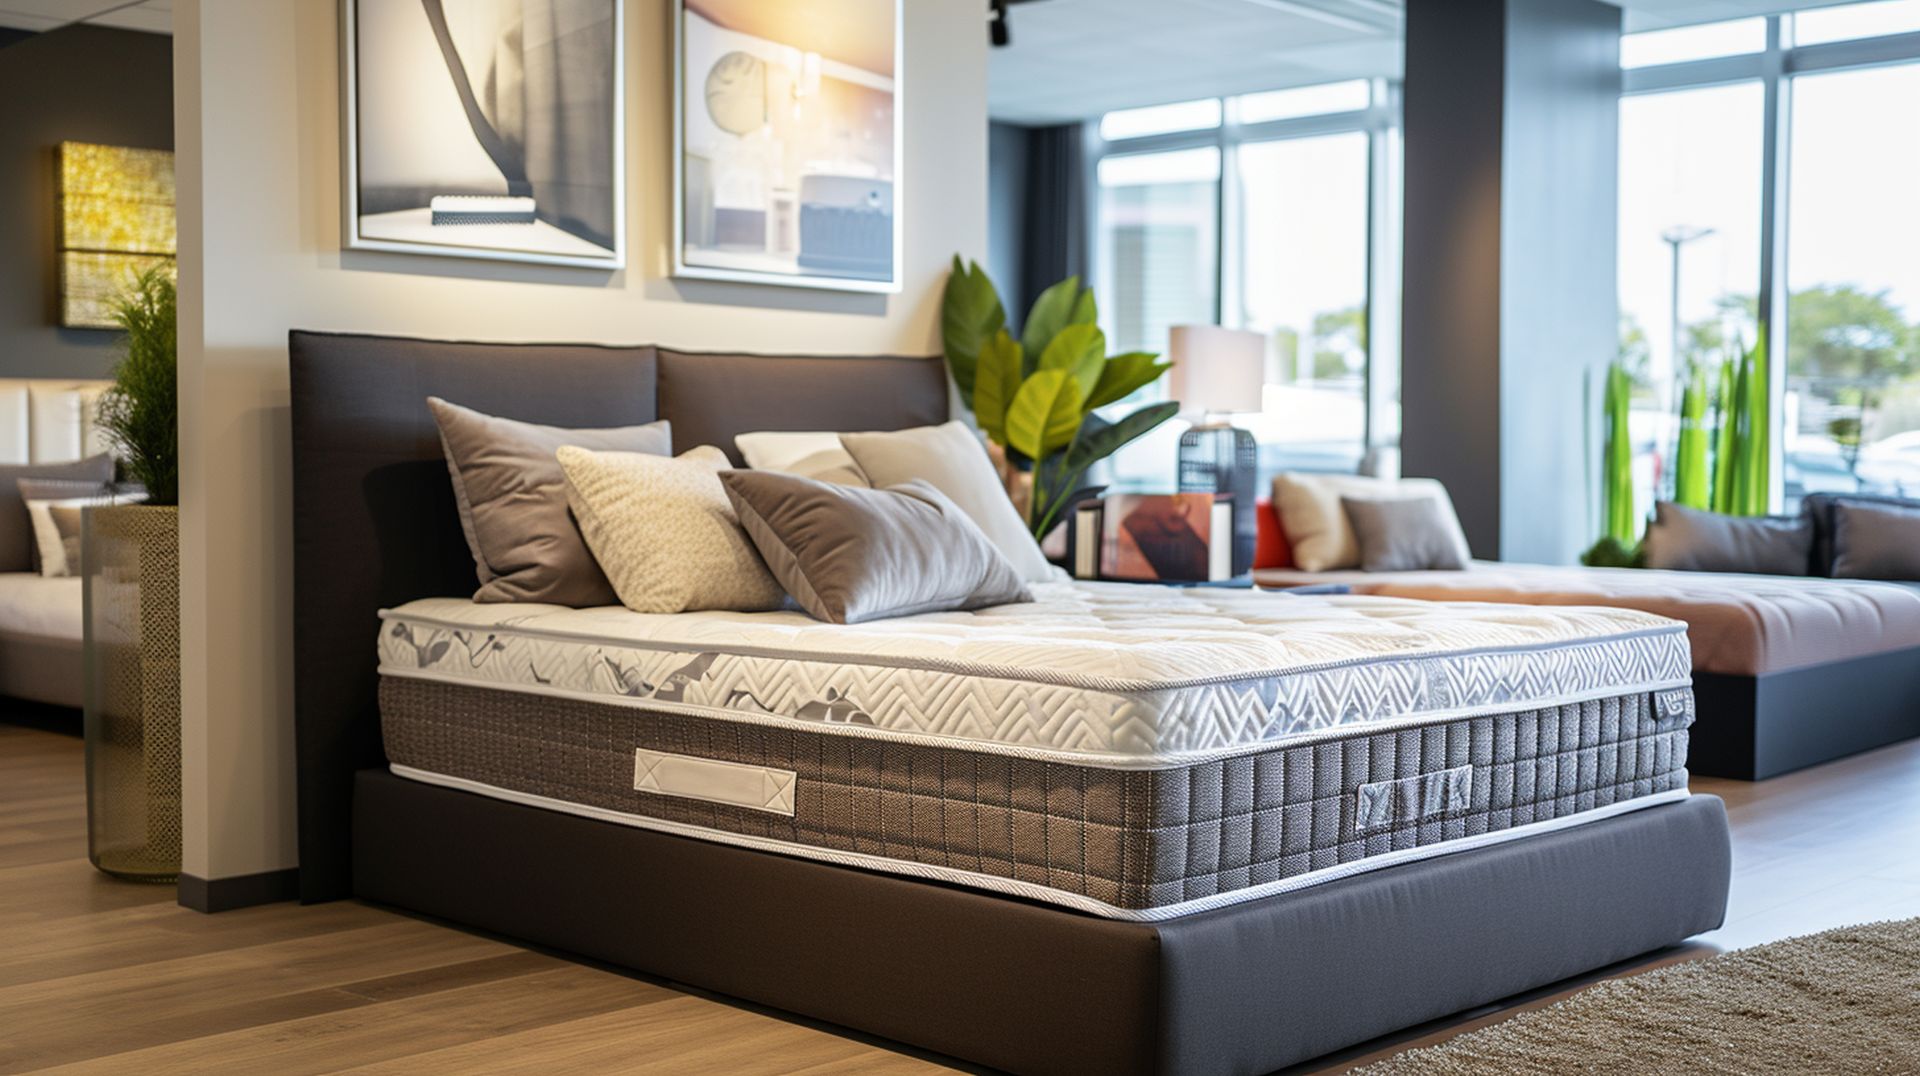 Local Apple Valley mattress stores have the best prices, sales, and deals if you're looking for a new mattress in Apple Valley